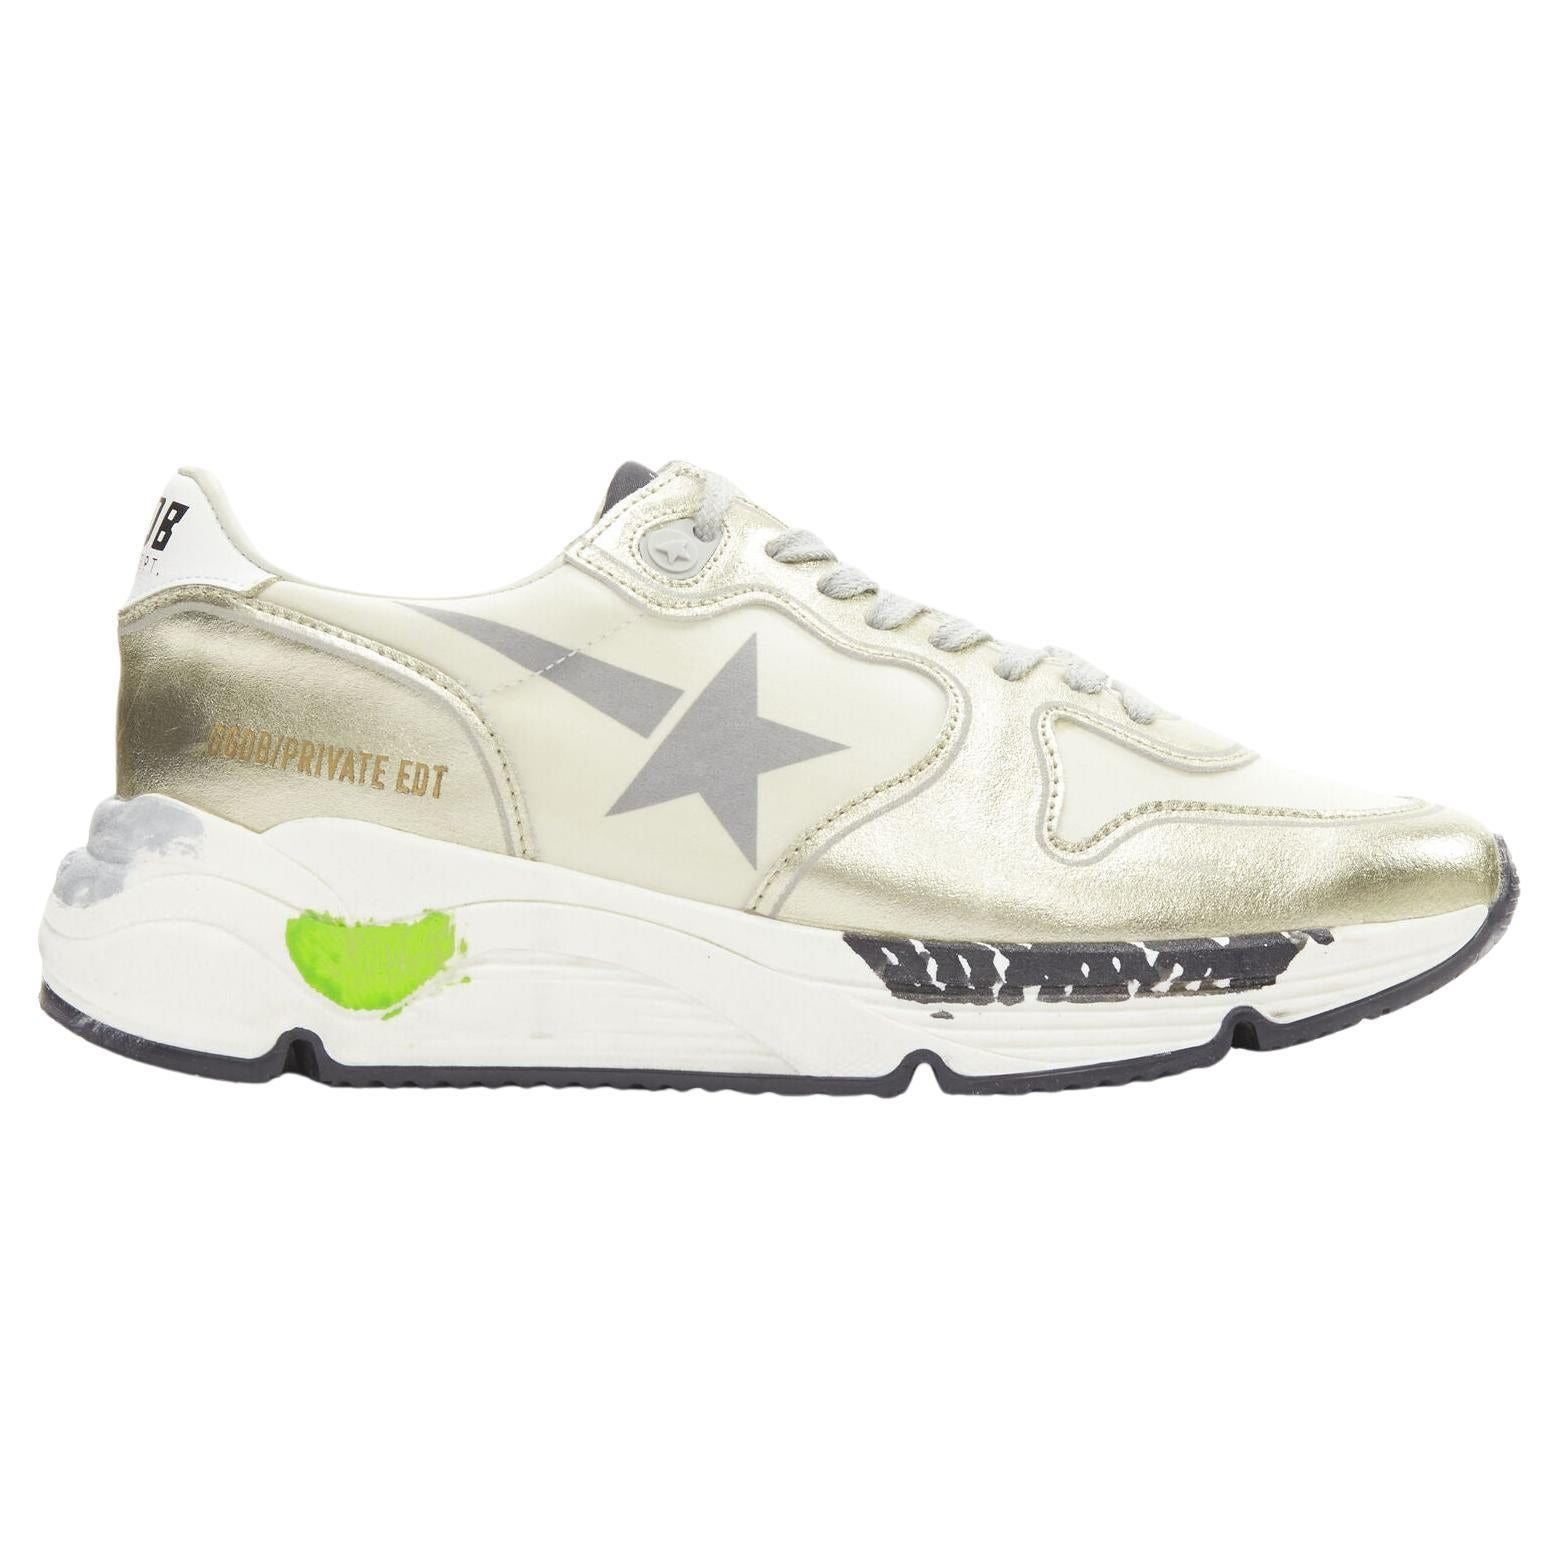 GOLDEN GOOSE Private EDT Running chunky metallic gold distressed sneaker EU38 For Sale